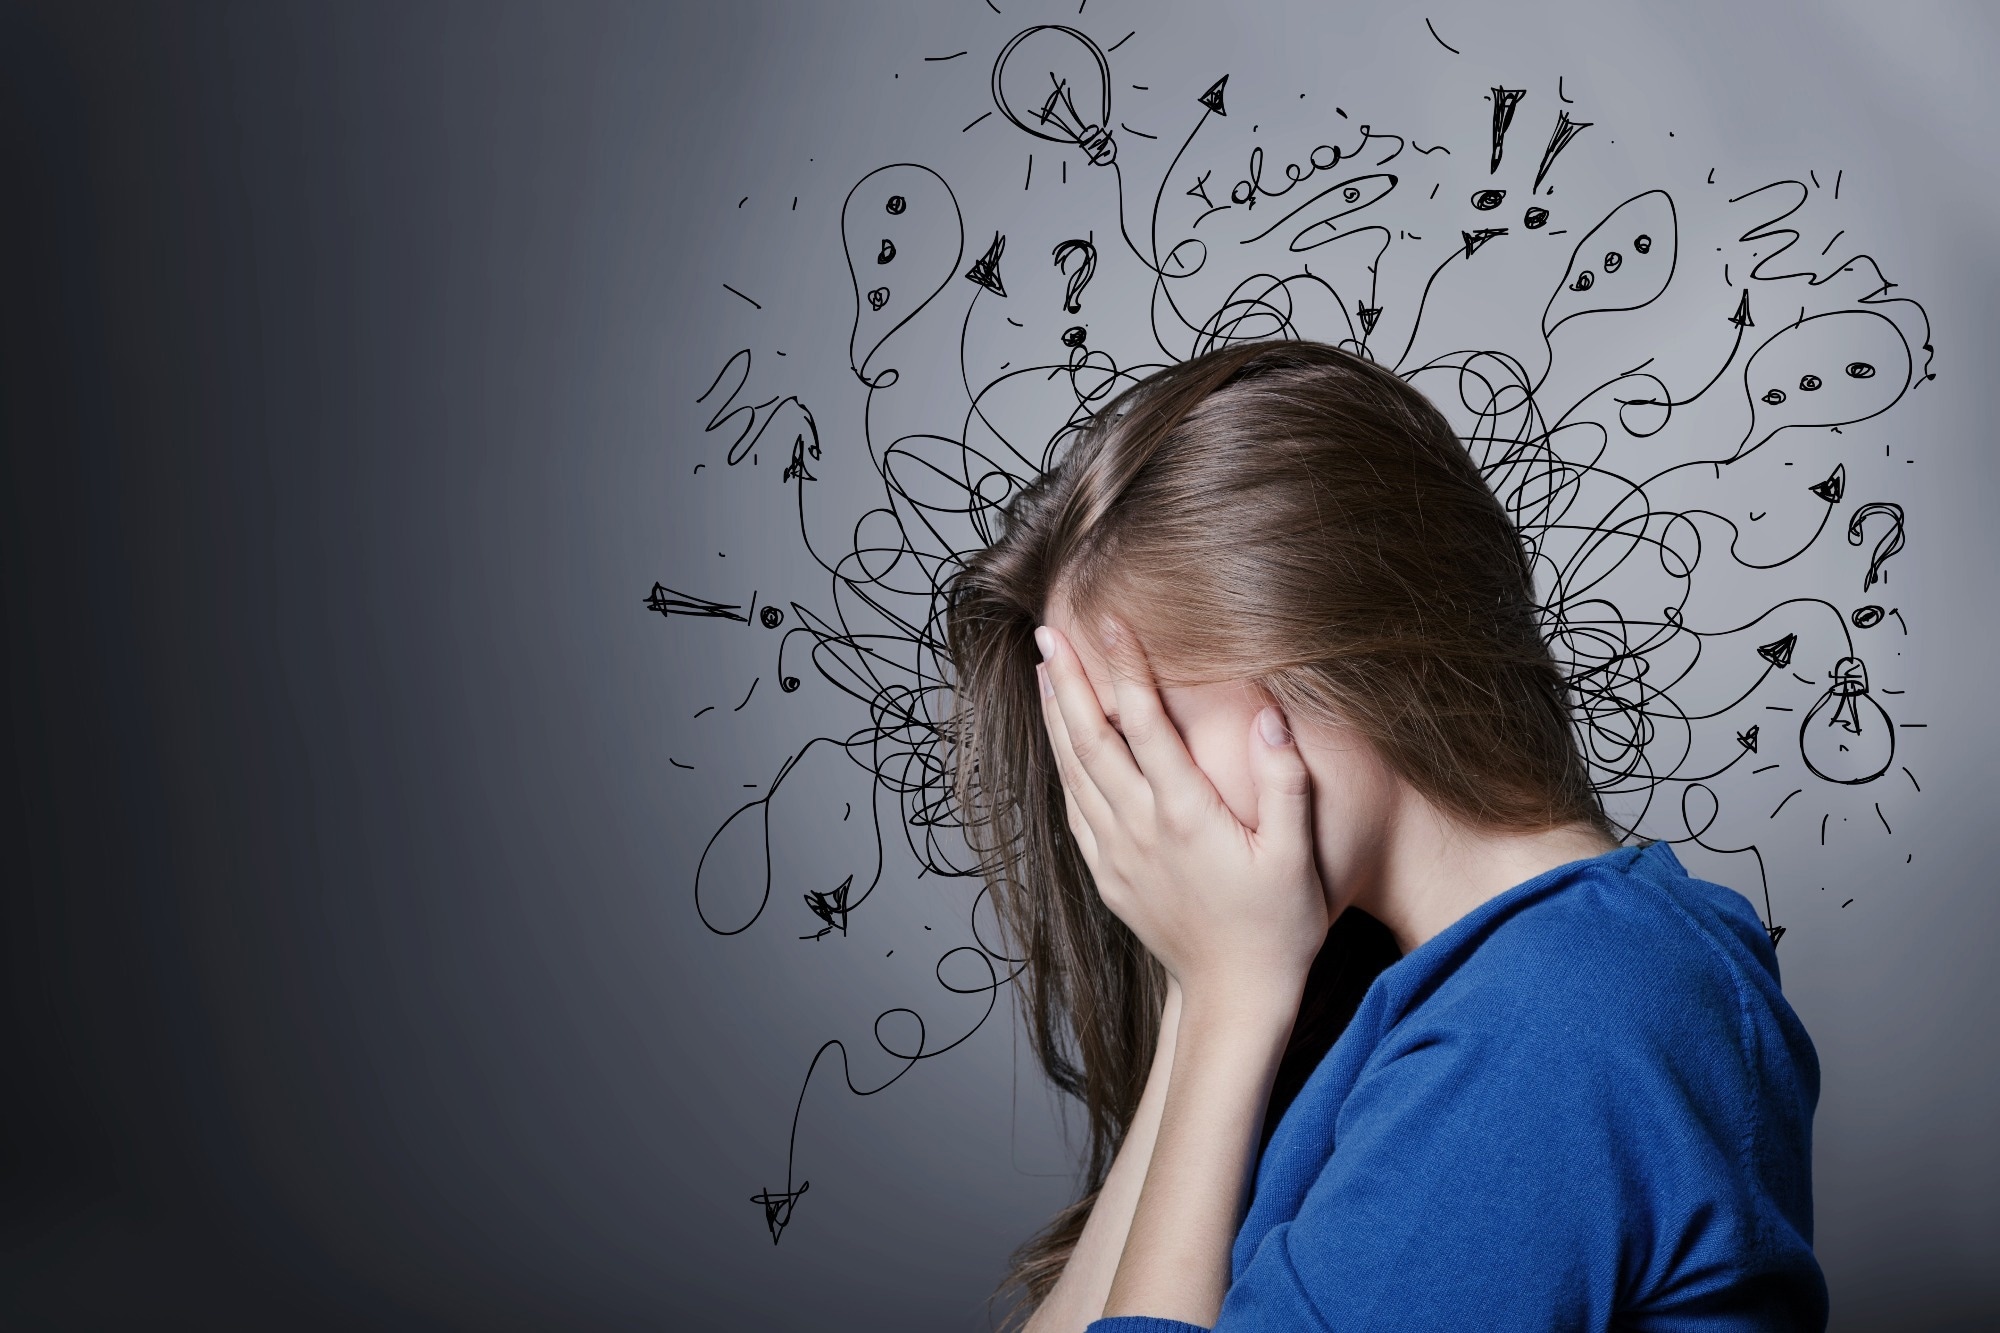 Decoding anxiety: Study reveals brain's role in behavioral inhibition risks